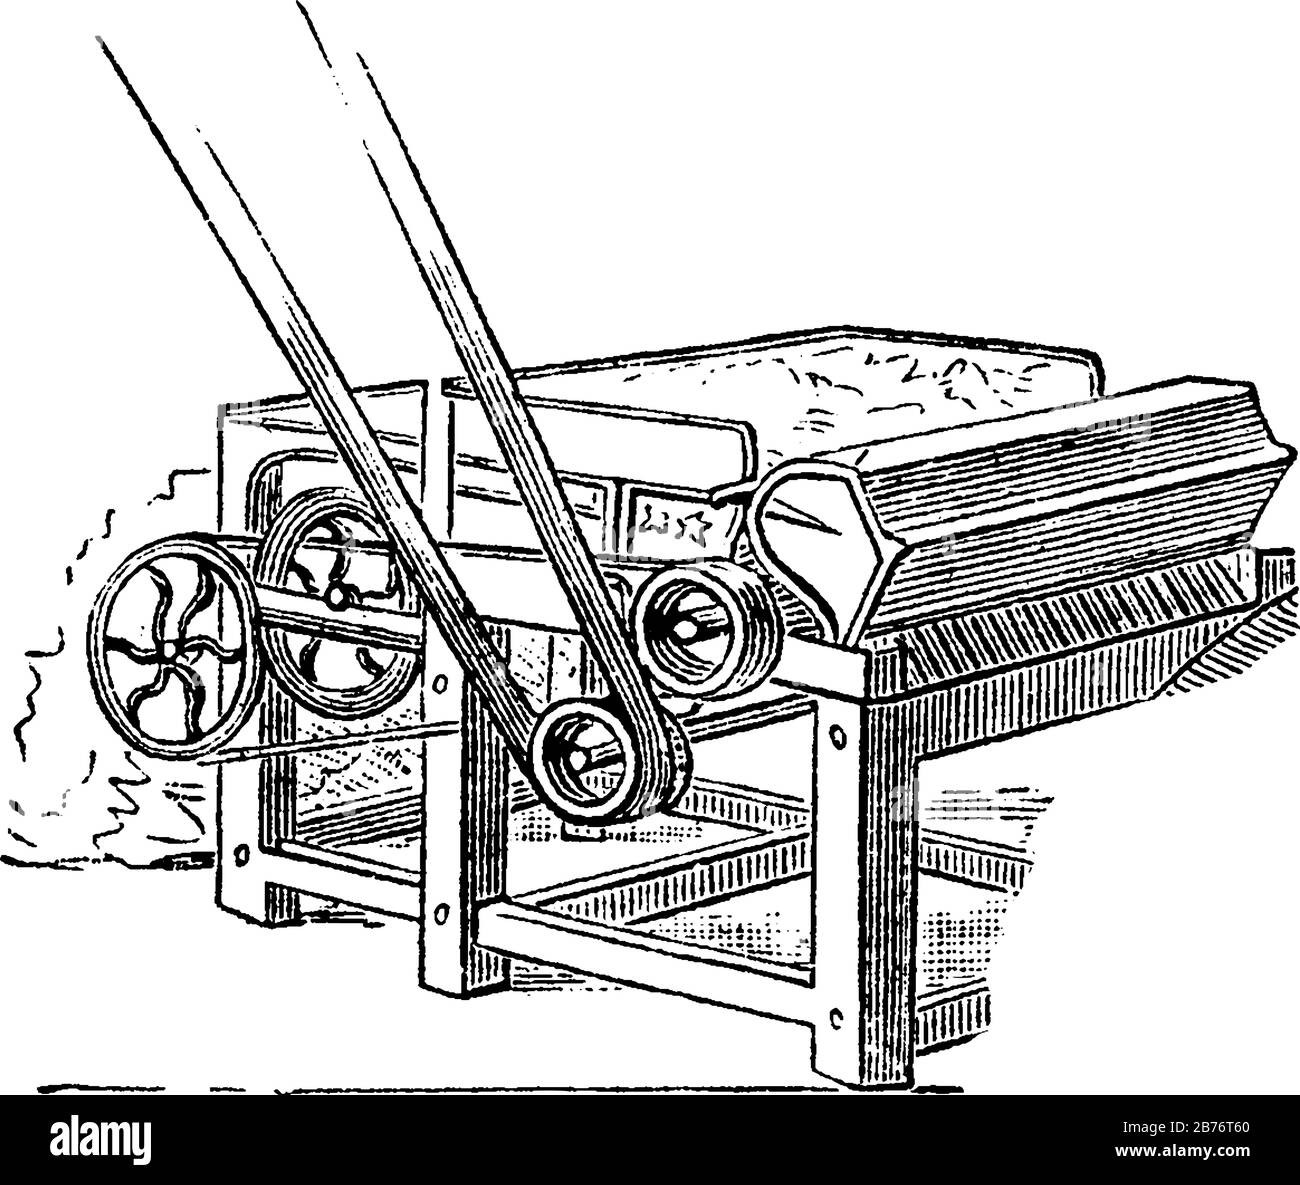 The cotton engine or cotton gin, that is used to separate the cotton fibers from the seedpods, vintage line drawing or engraving illustration. Stock Vector